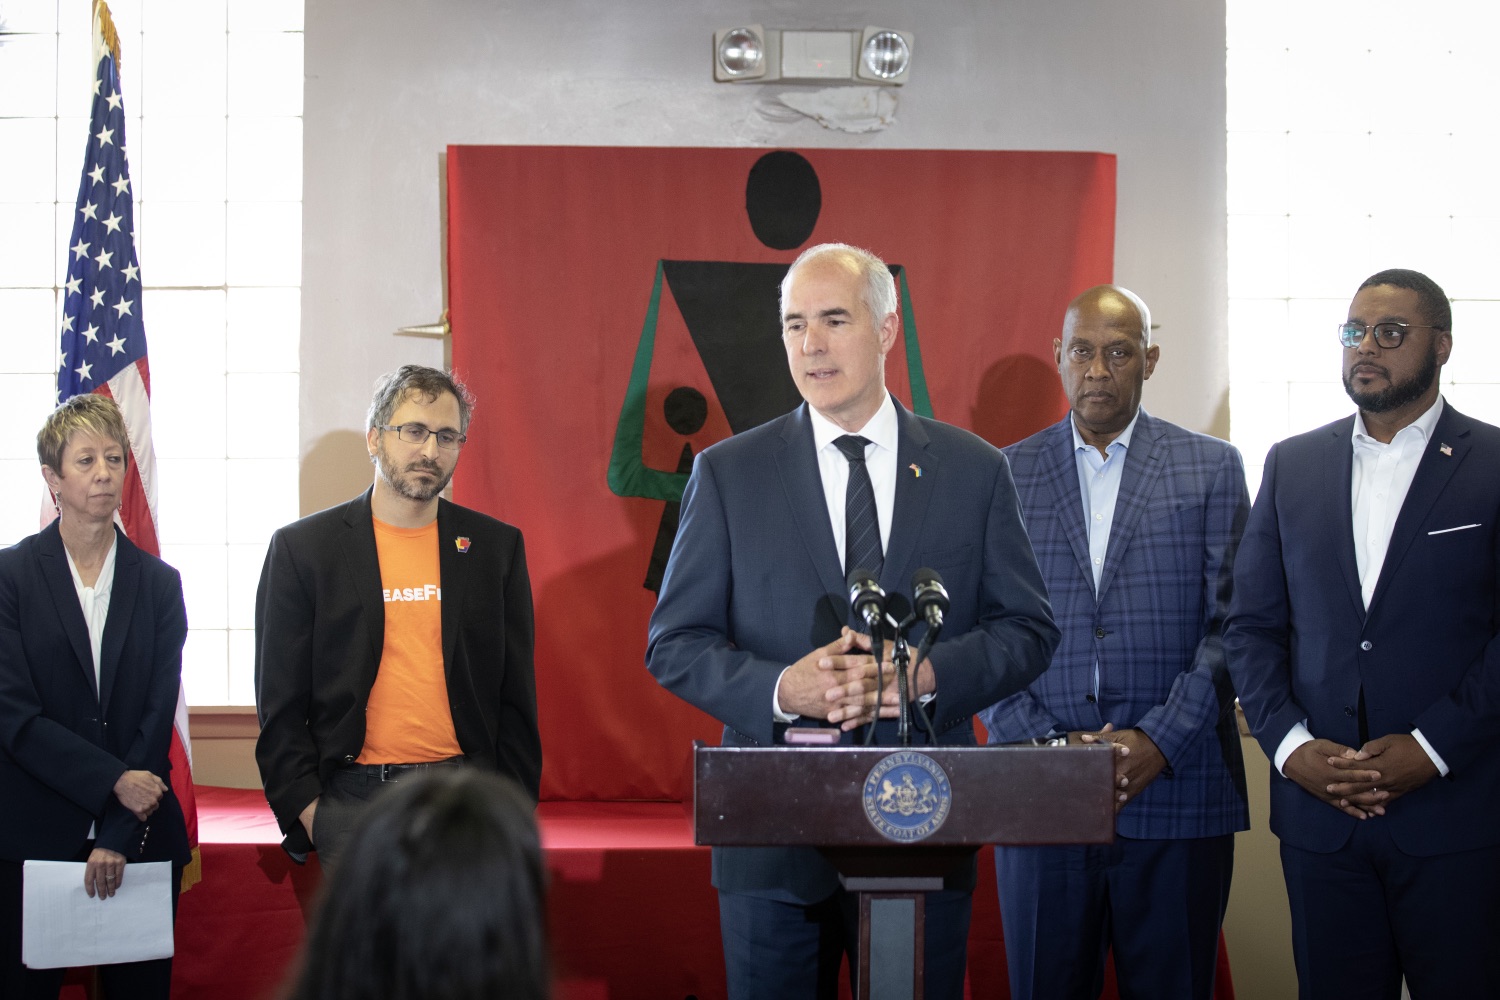 As part of National Gun Violence Awareness Month, U.S. Sen. Bob Casey, U.S. Rep. Dwight Evans, and Lt. Gov. Austin Davis were in Philadelphia to announce a state initiative to support victims of gun violence through the Pennsylvania Commission on Crime and Delinquency. U.S. Sen. Bob Casey, U.S. Rep. Dwight Evans, and Lt. Gov. Austin Davis announced a state initiative to support victims of gun violence. Representatives from the Pennsylvania Commission on Crime and Delinquency, victims advocacy groups, and gun safety organizations were also in attendance. Pictured here is U.S. Senator Bob Casey, delivering remarks at their press conference in Philadelphia, Pennsylvania. June 9, 2023.<br><a href="https://filesource.amperwave.net/commonwealthofpa/photo/23176_lg_gunViolence_JP_17.jpg" target="_blank">⇣ Download Photo</a>